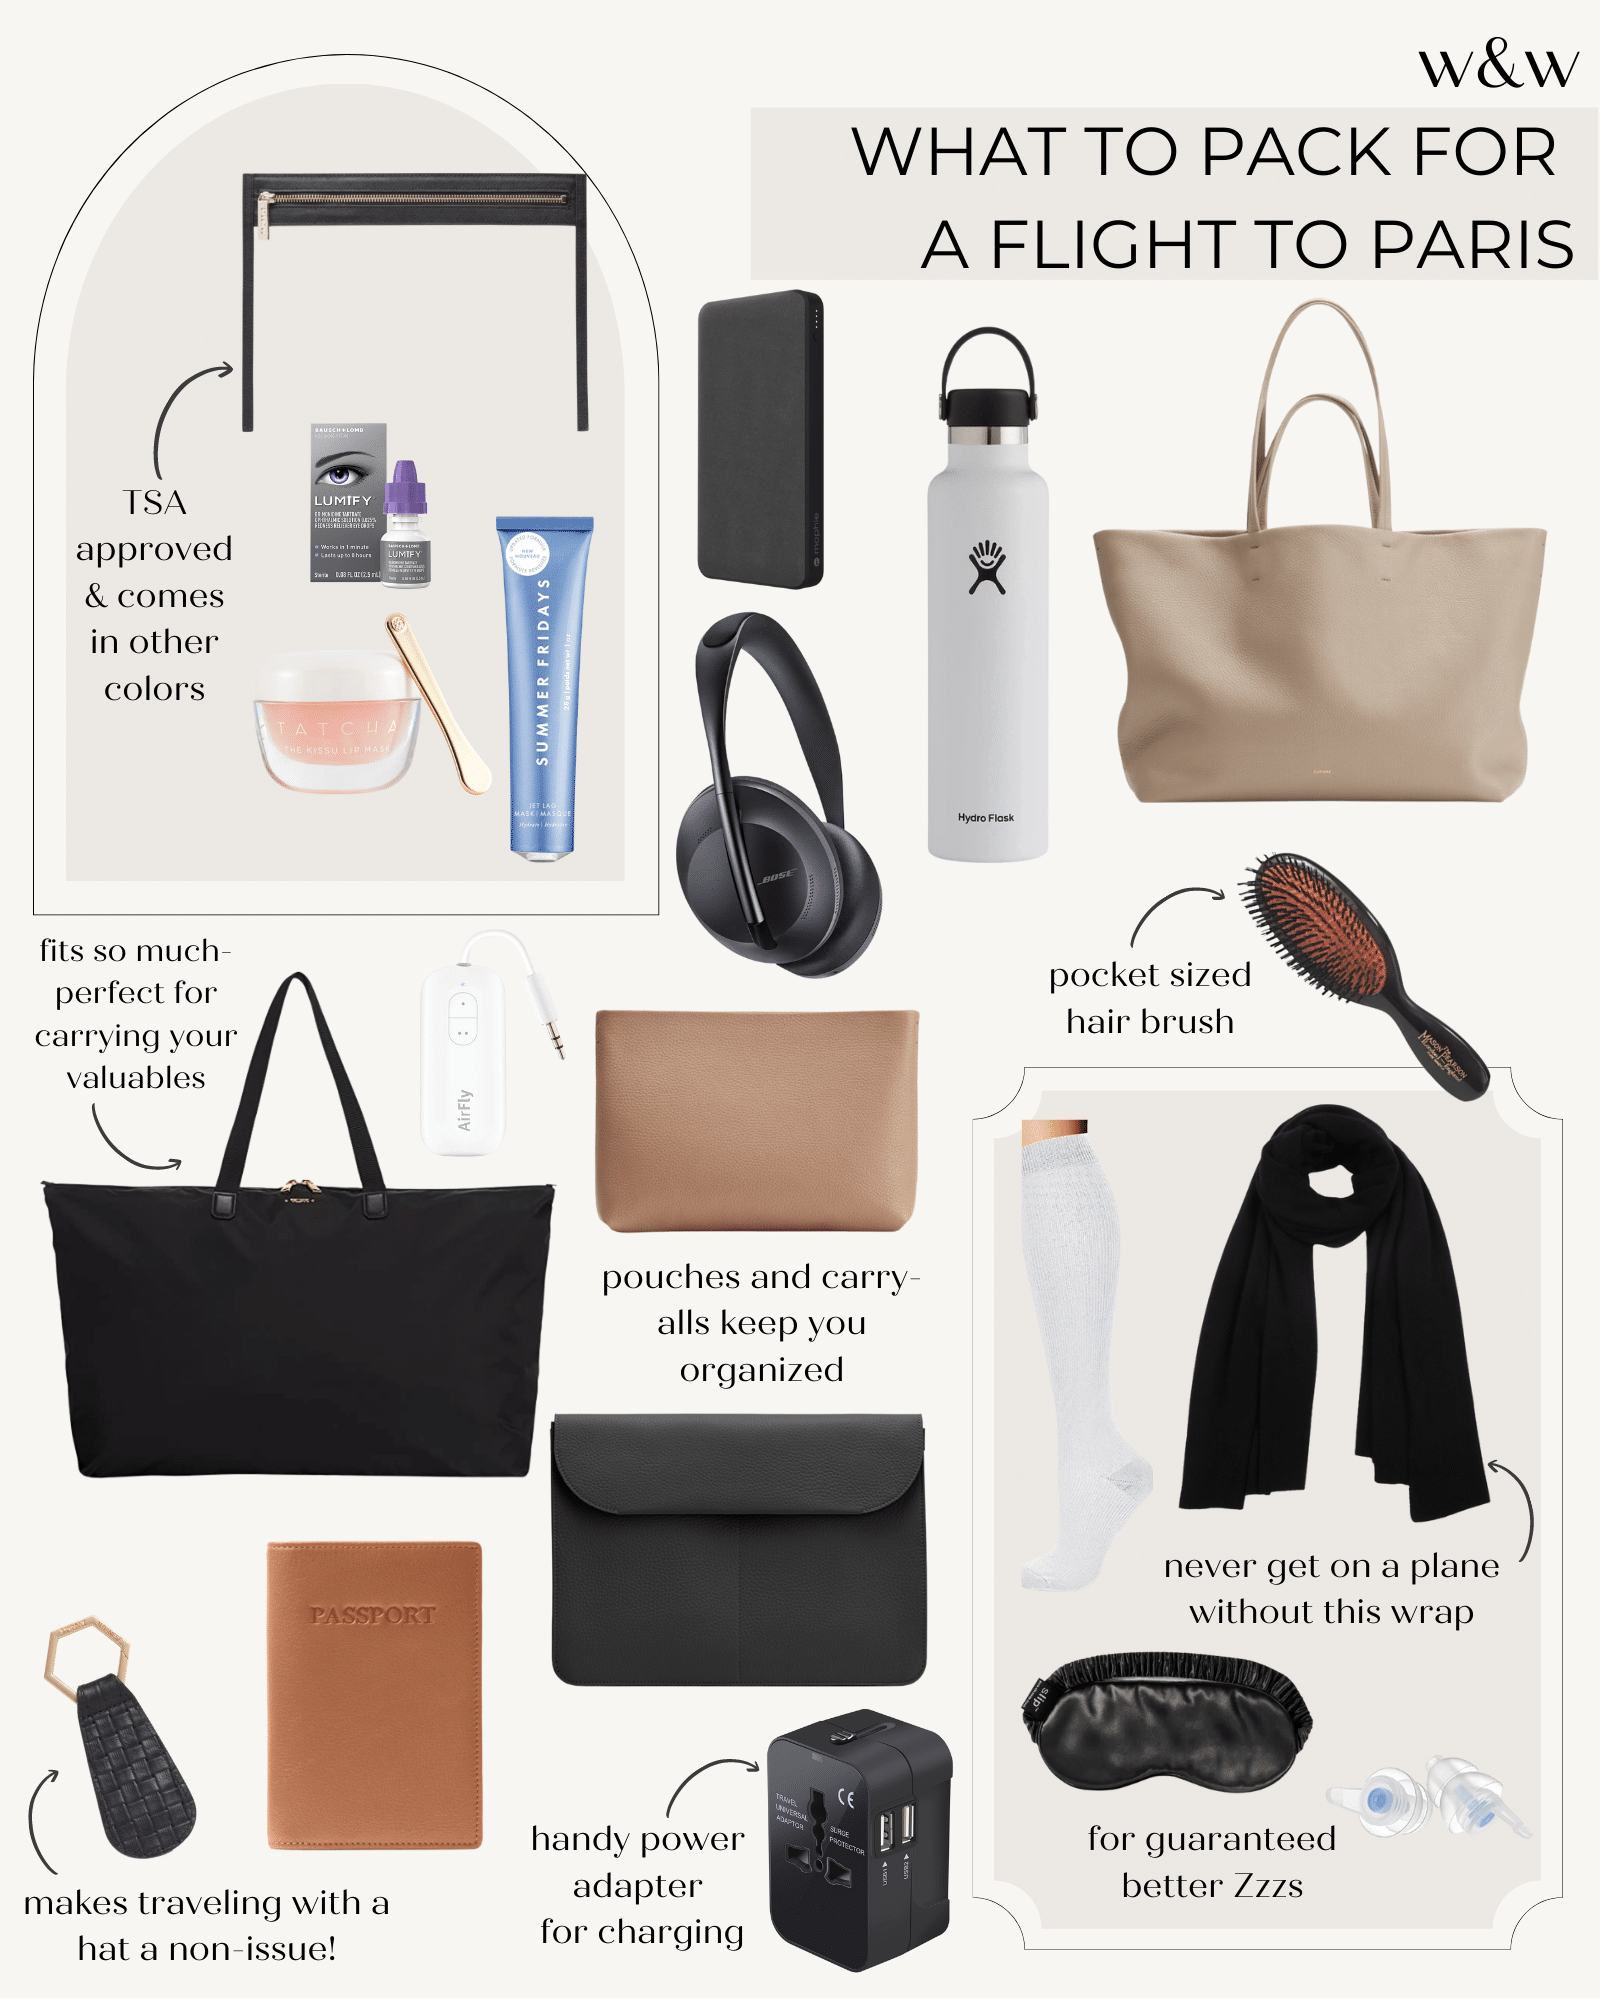 What to Pack for a flight to Paris